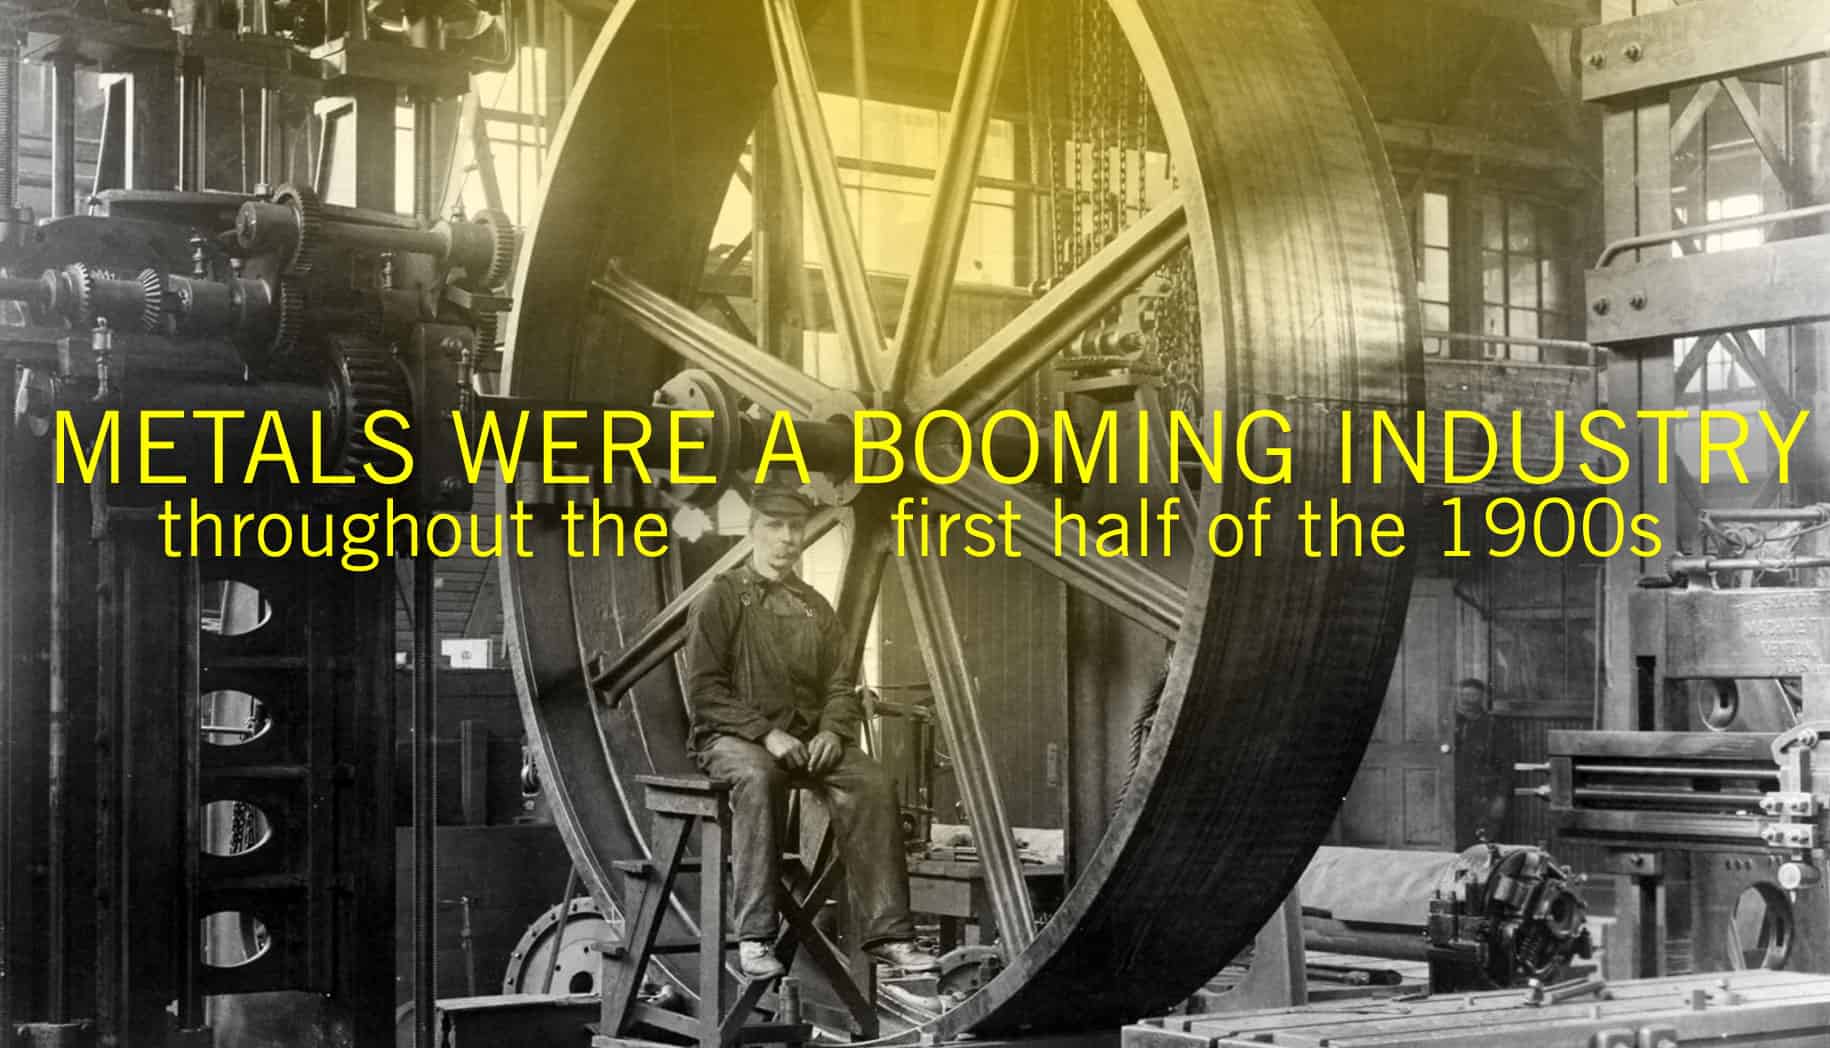 Regional recycling start in the 1900s when the metals industry starts